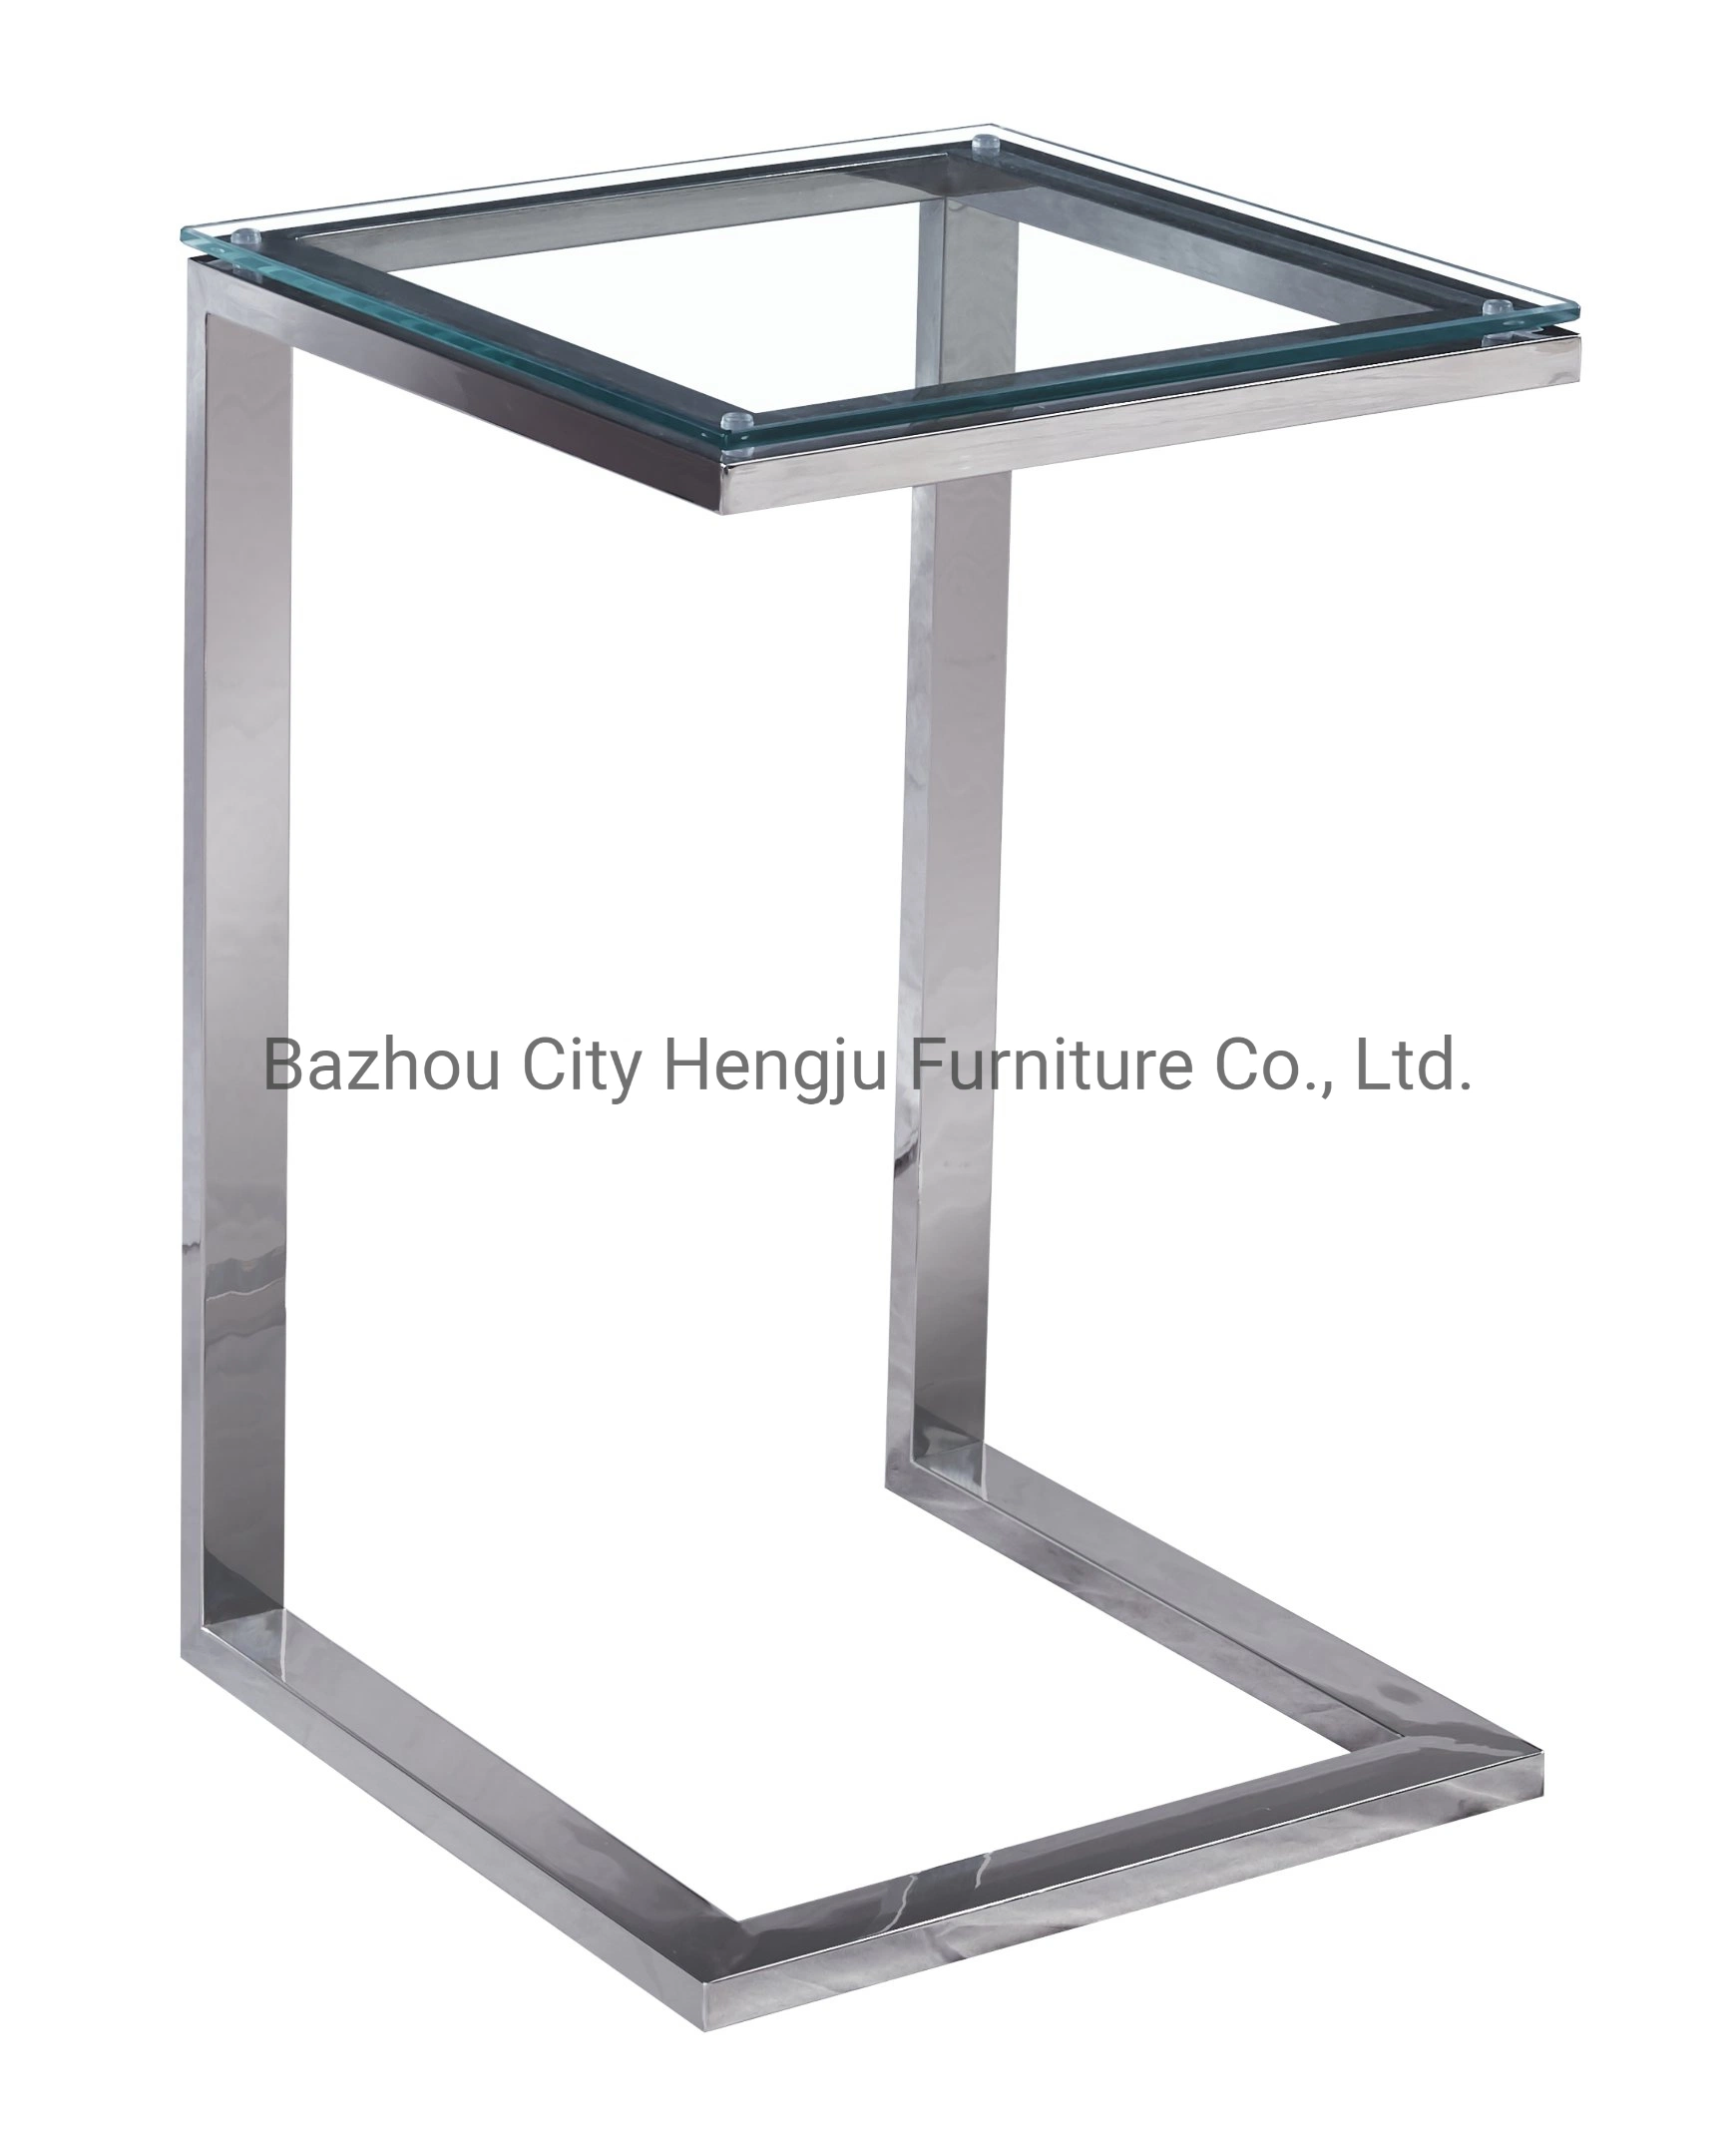 Stainless Steel Table Suit Living Room Furniture Glass End Tables Sofa Table Side Table Bedroom Table Wedding Table